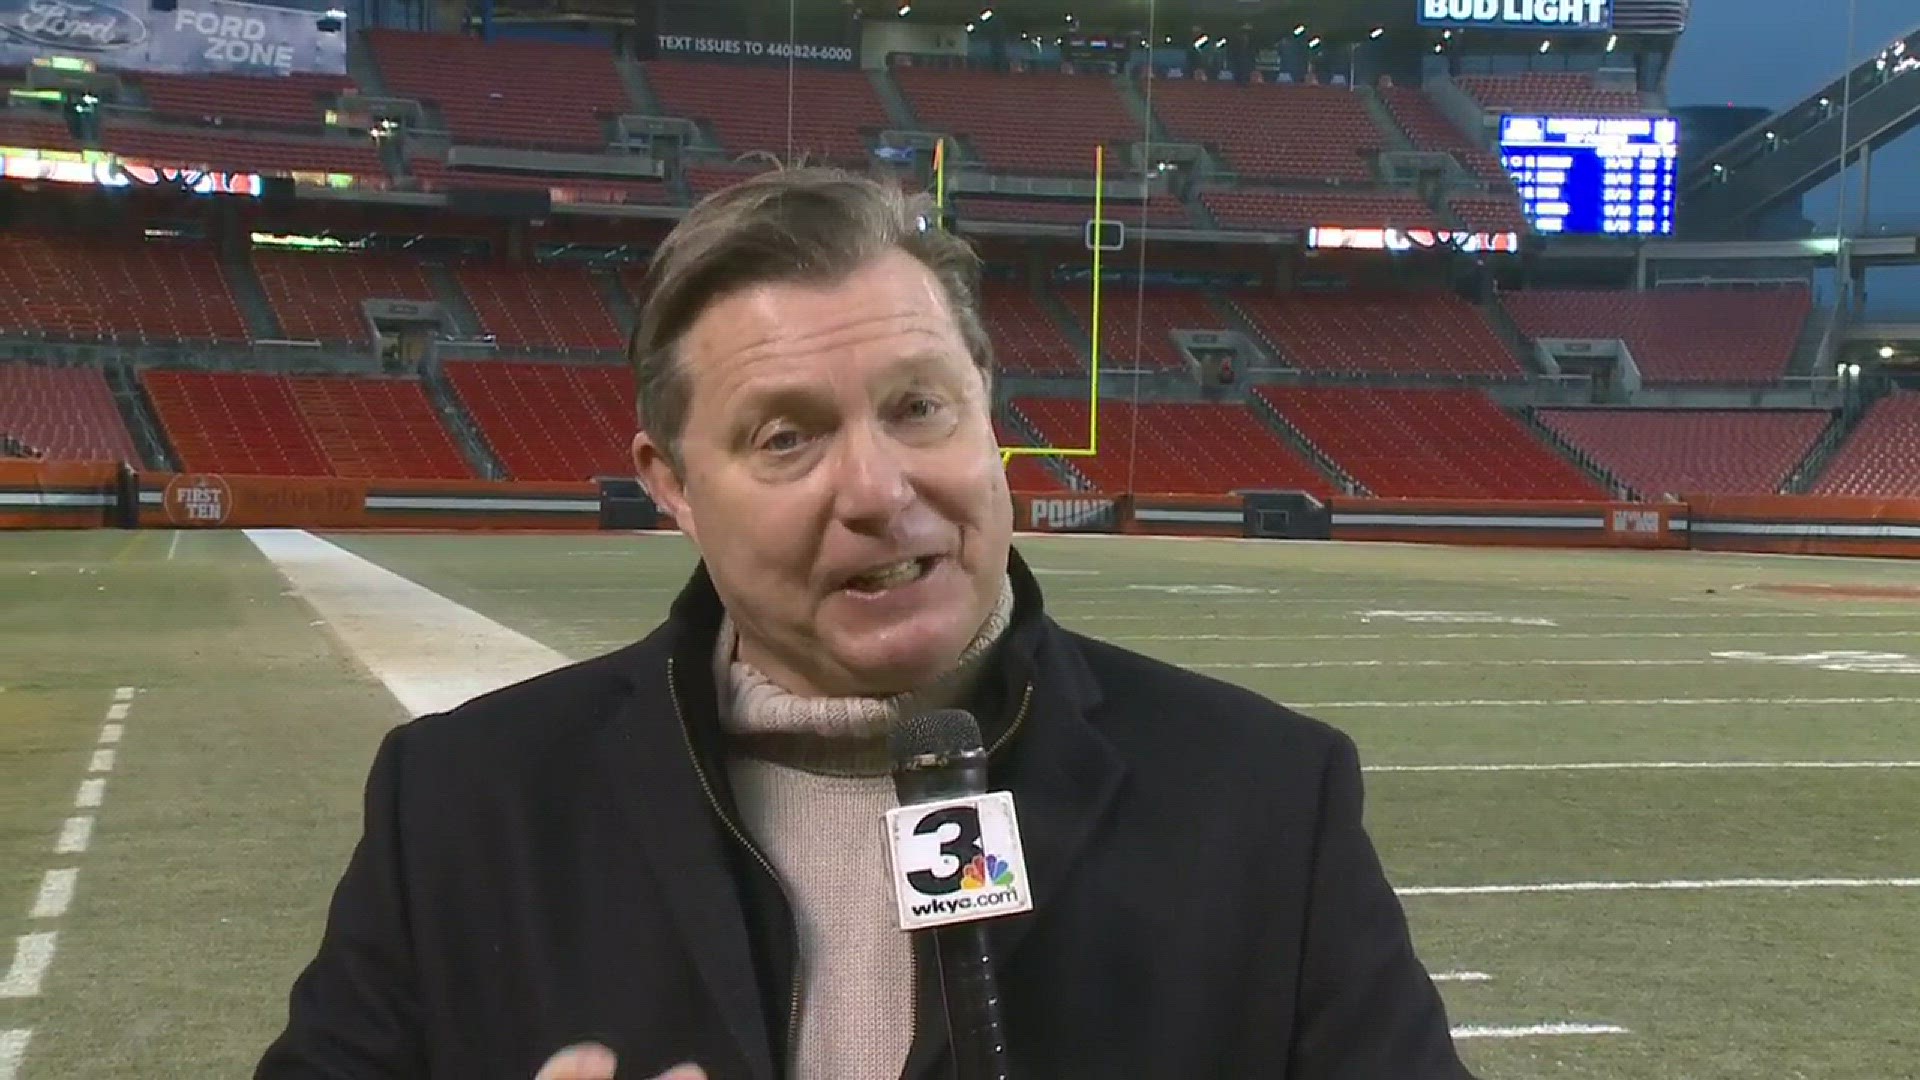 Here is Jimmy's Take for the Browns vs. Chargers game Saturday.